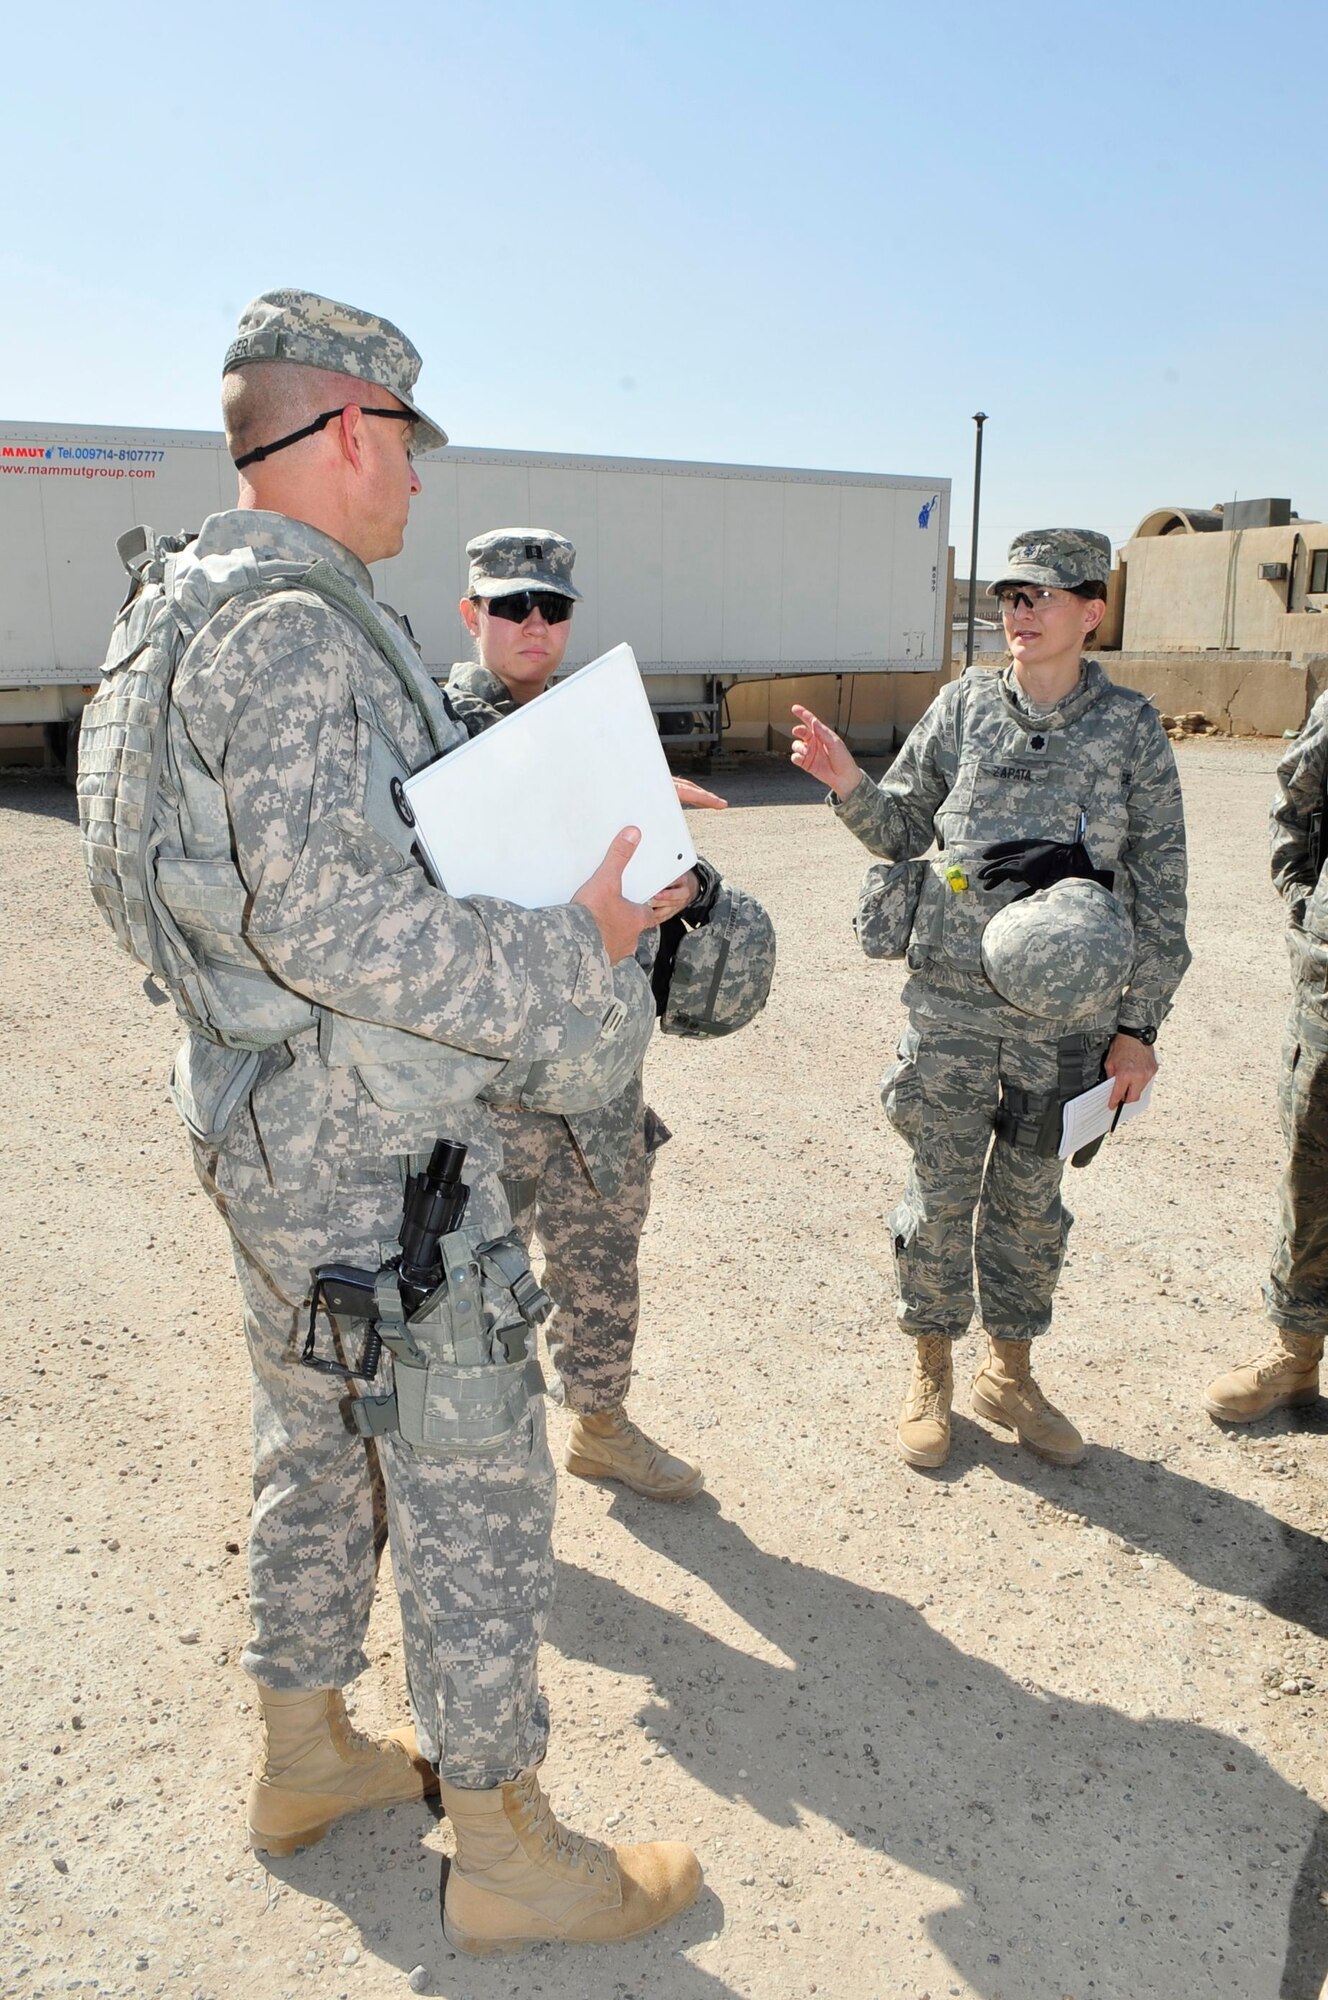 From left to right, U.S. Army Capt. Mark Weber, U.S. Forces – Iraq corrections assistance transition team officer in charge, from Greenfield, Iowa., U.S. Army Capt. Kristen Berdahl and U.S. Air Force Lt. Col. Kaylin Haywood Zapata discuss preparation for a mission at Joint Security Station Shield, Iraq, April 6, 2011. Before going outside-the-wire to assess the conditions at a women’s prison in Baghdad’s Rusafa District, these members of the corrections assistance transition team go over checklists of questions they will ask Iraqi officials at the facility. (U.S. Air Force photo by Senior Master Sgt. Larry A. Schneck)